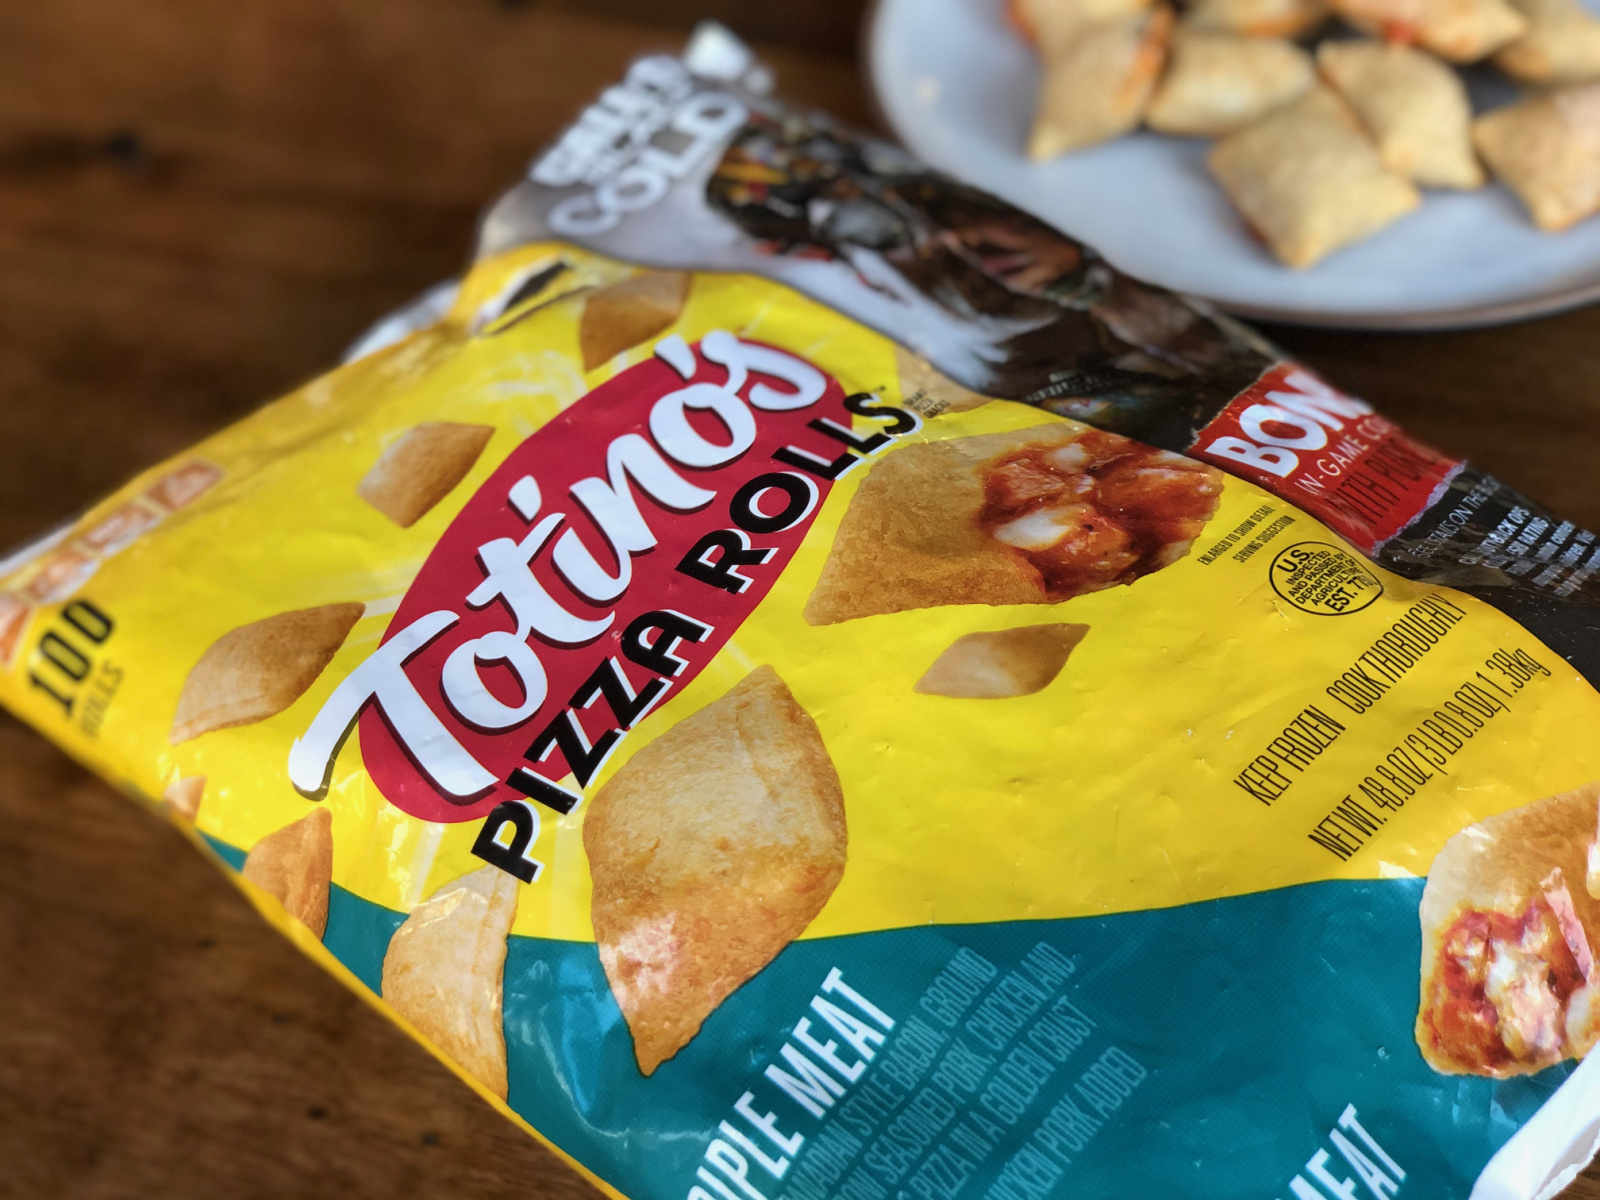 Big Bags Of Totino’s Pizza Rolls As Low As $5.55 At Publix (Regular Price $12.59)